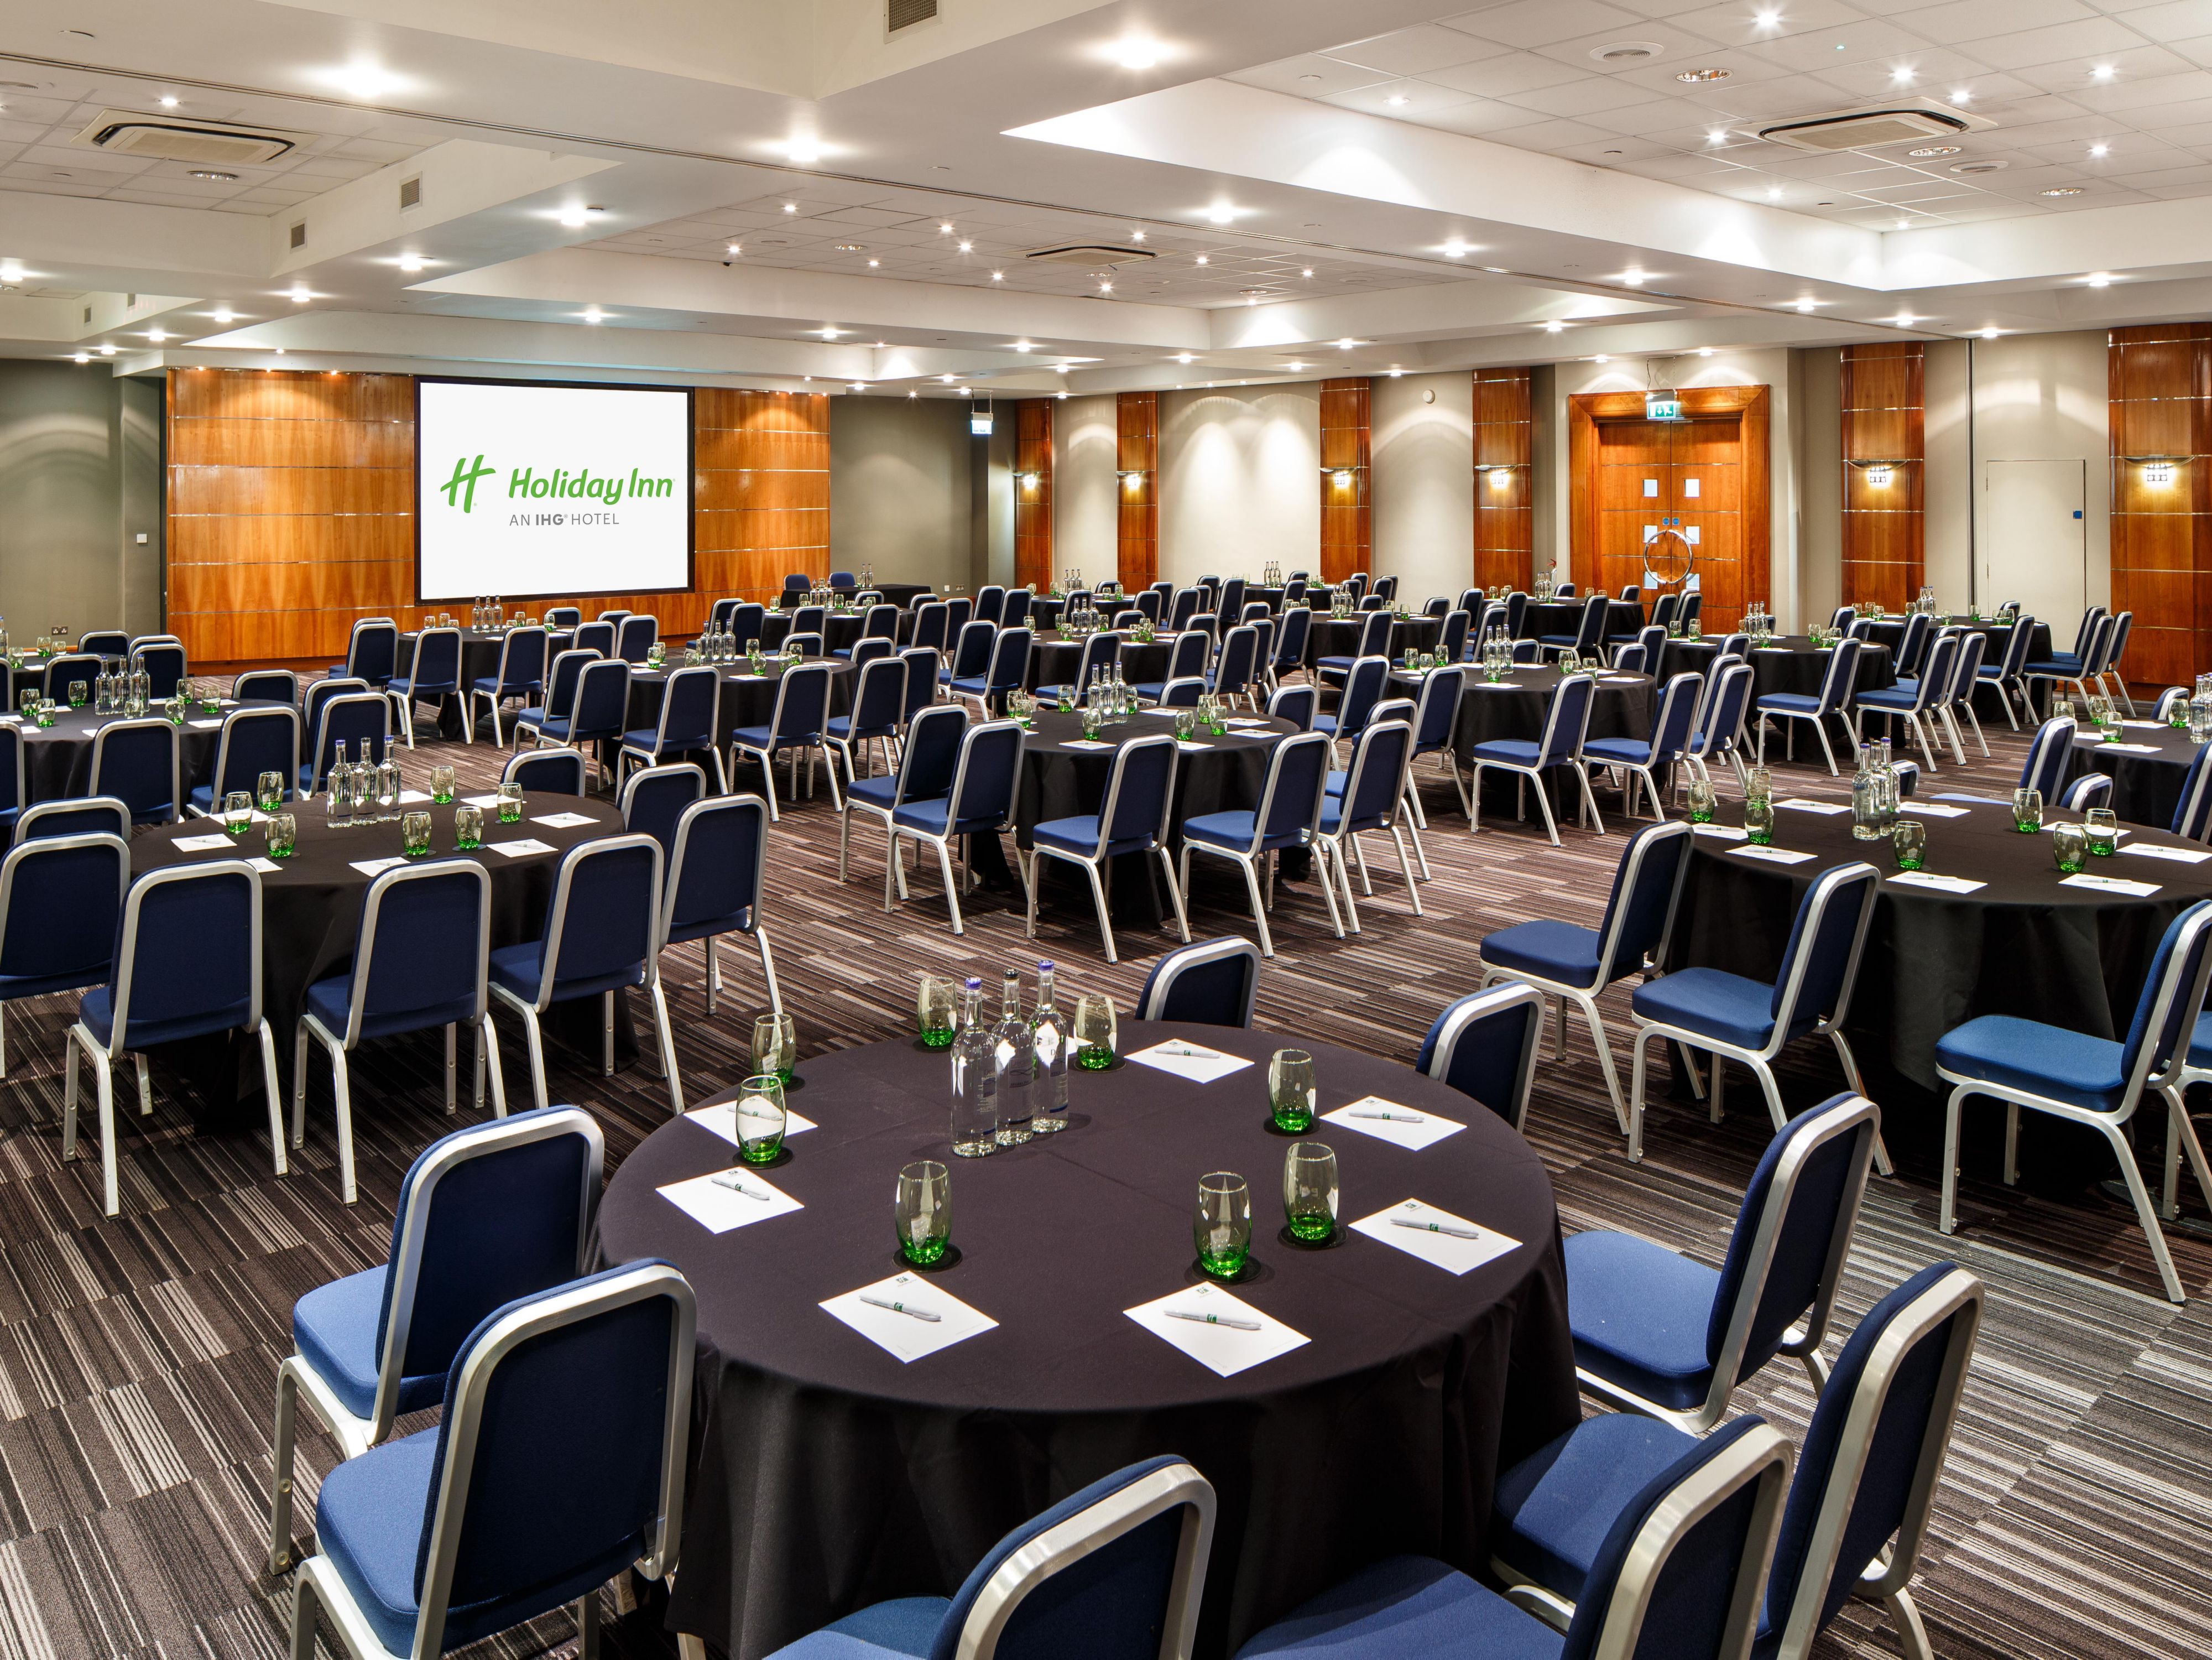 Host meetings or events for up to 350 guests in our fully equipped, versatile meeting rooms in the dedicated Academy Conference Centre with its own reception, bar and banqueting kitchen plus a dedicated team on hand to ensure everything runs smoothly. 